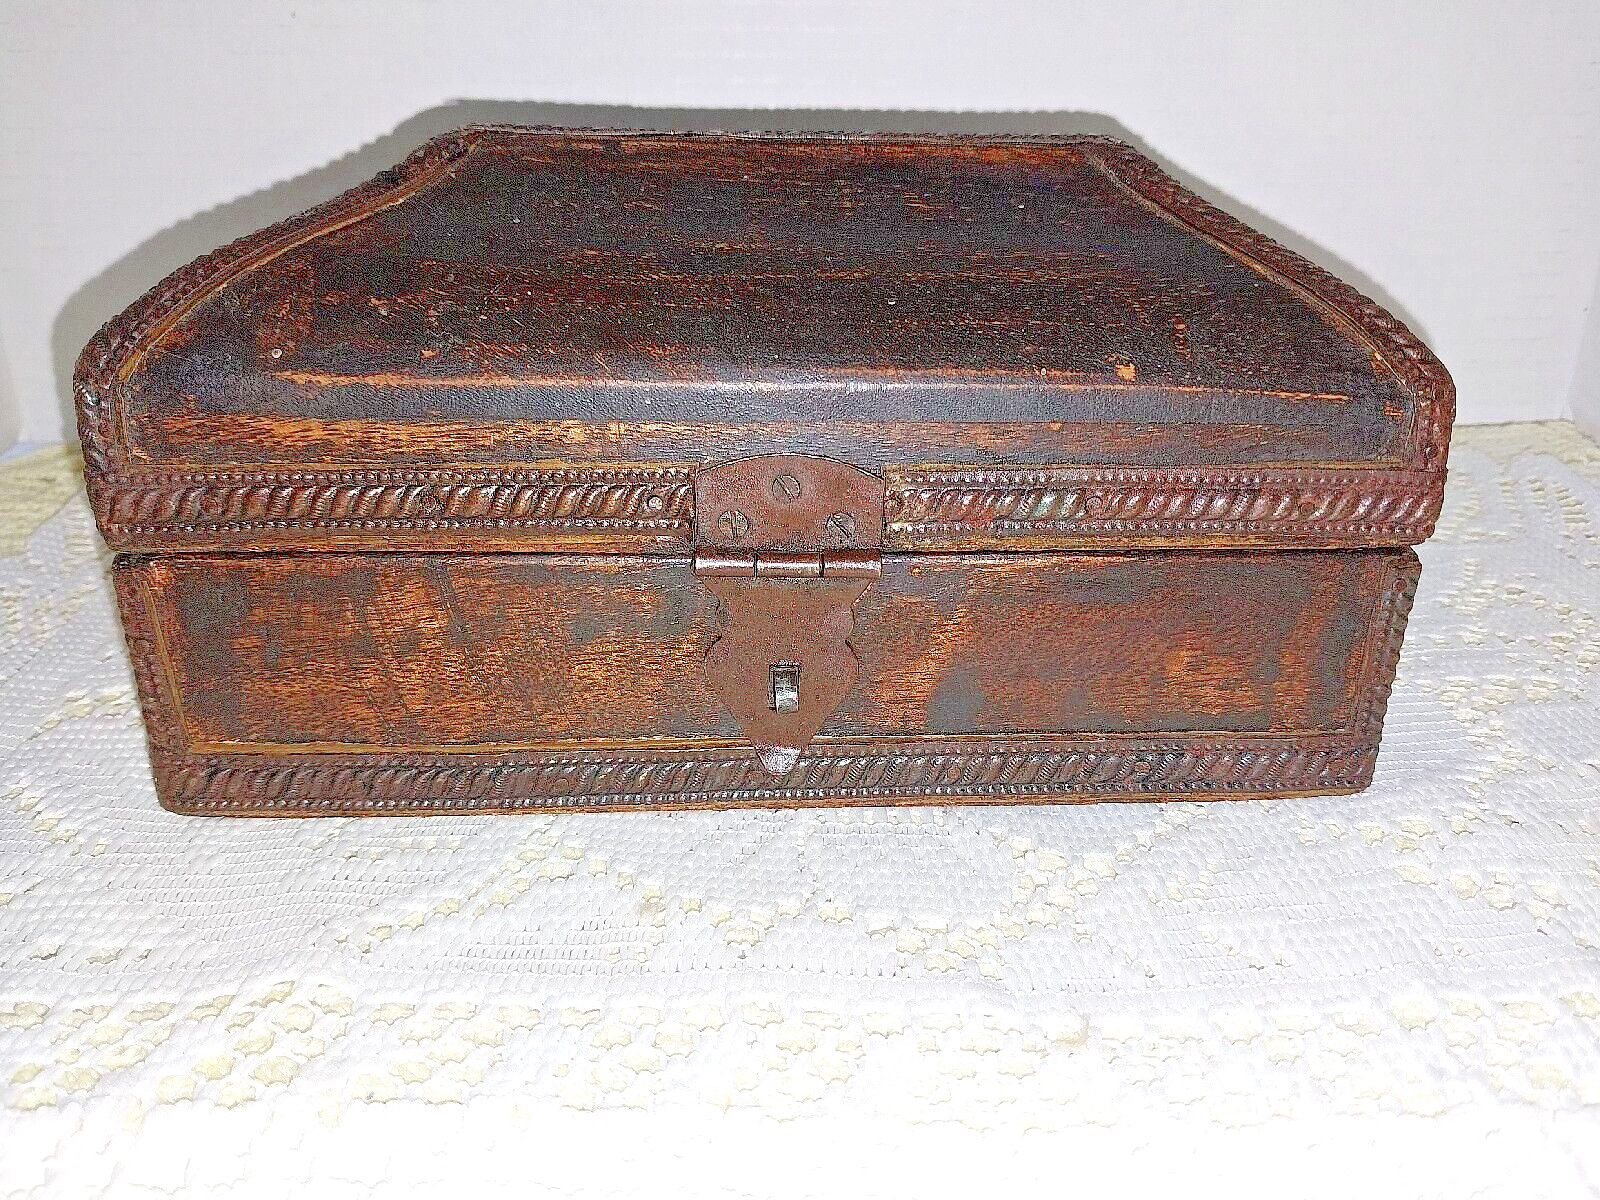 Rustic, Wood box with metal strapping, lock loop, wood Casket, Dome top